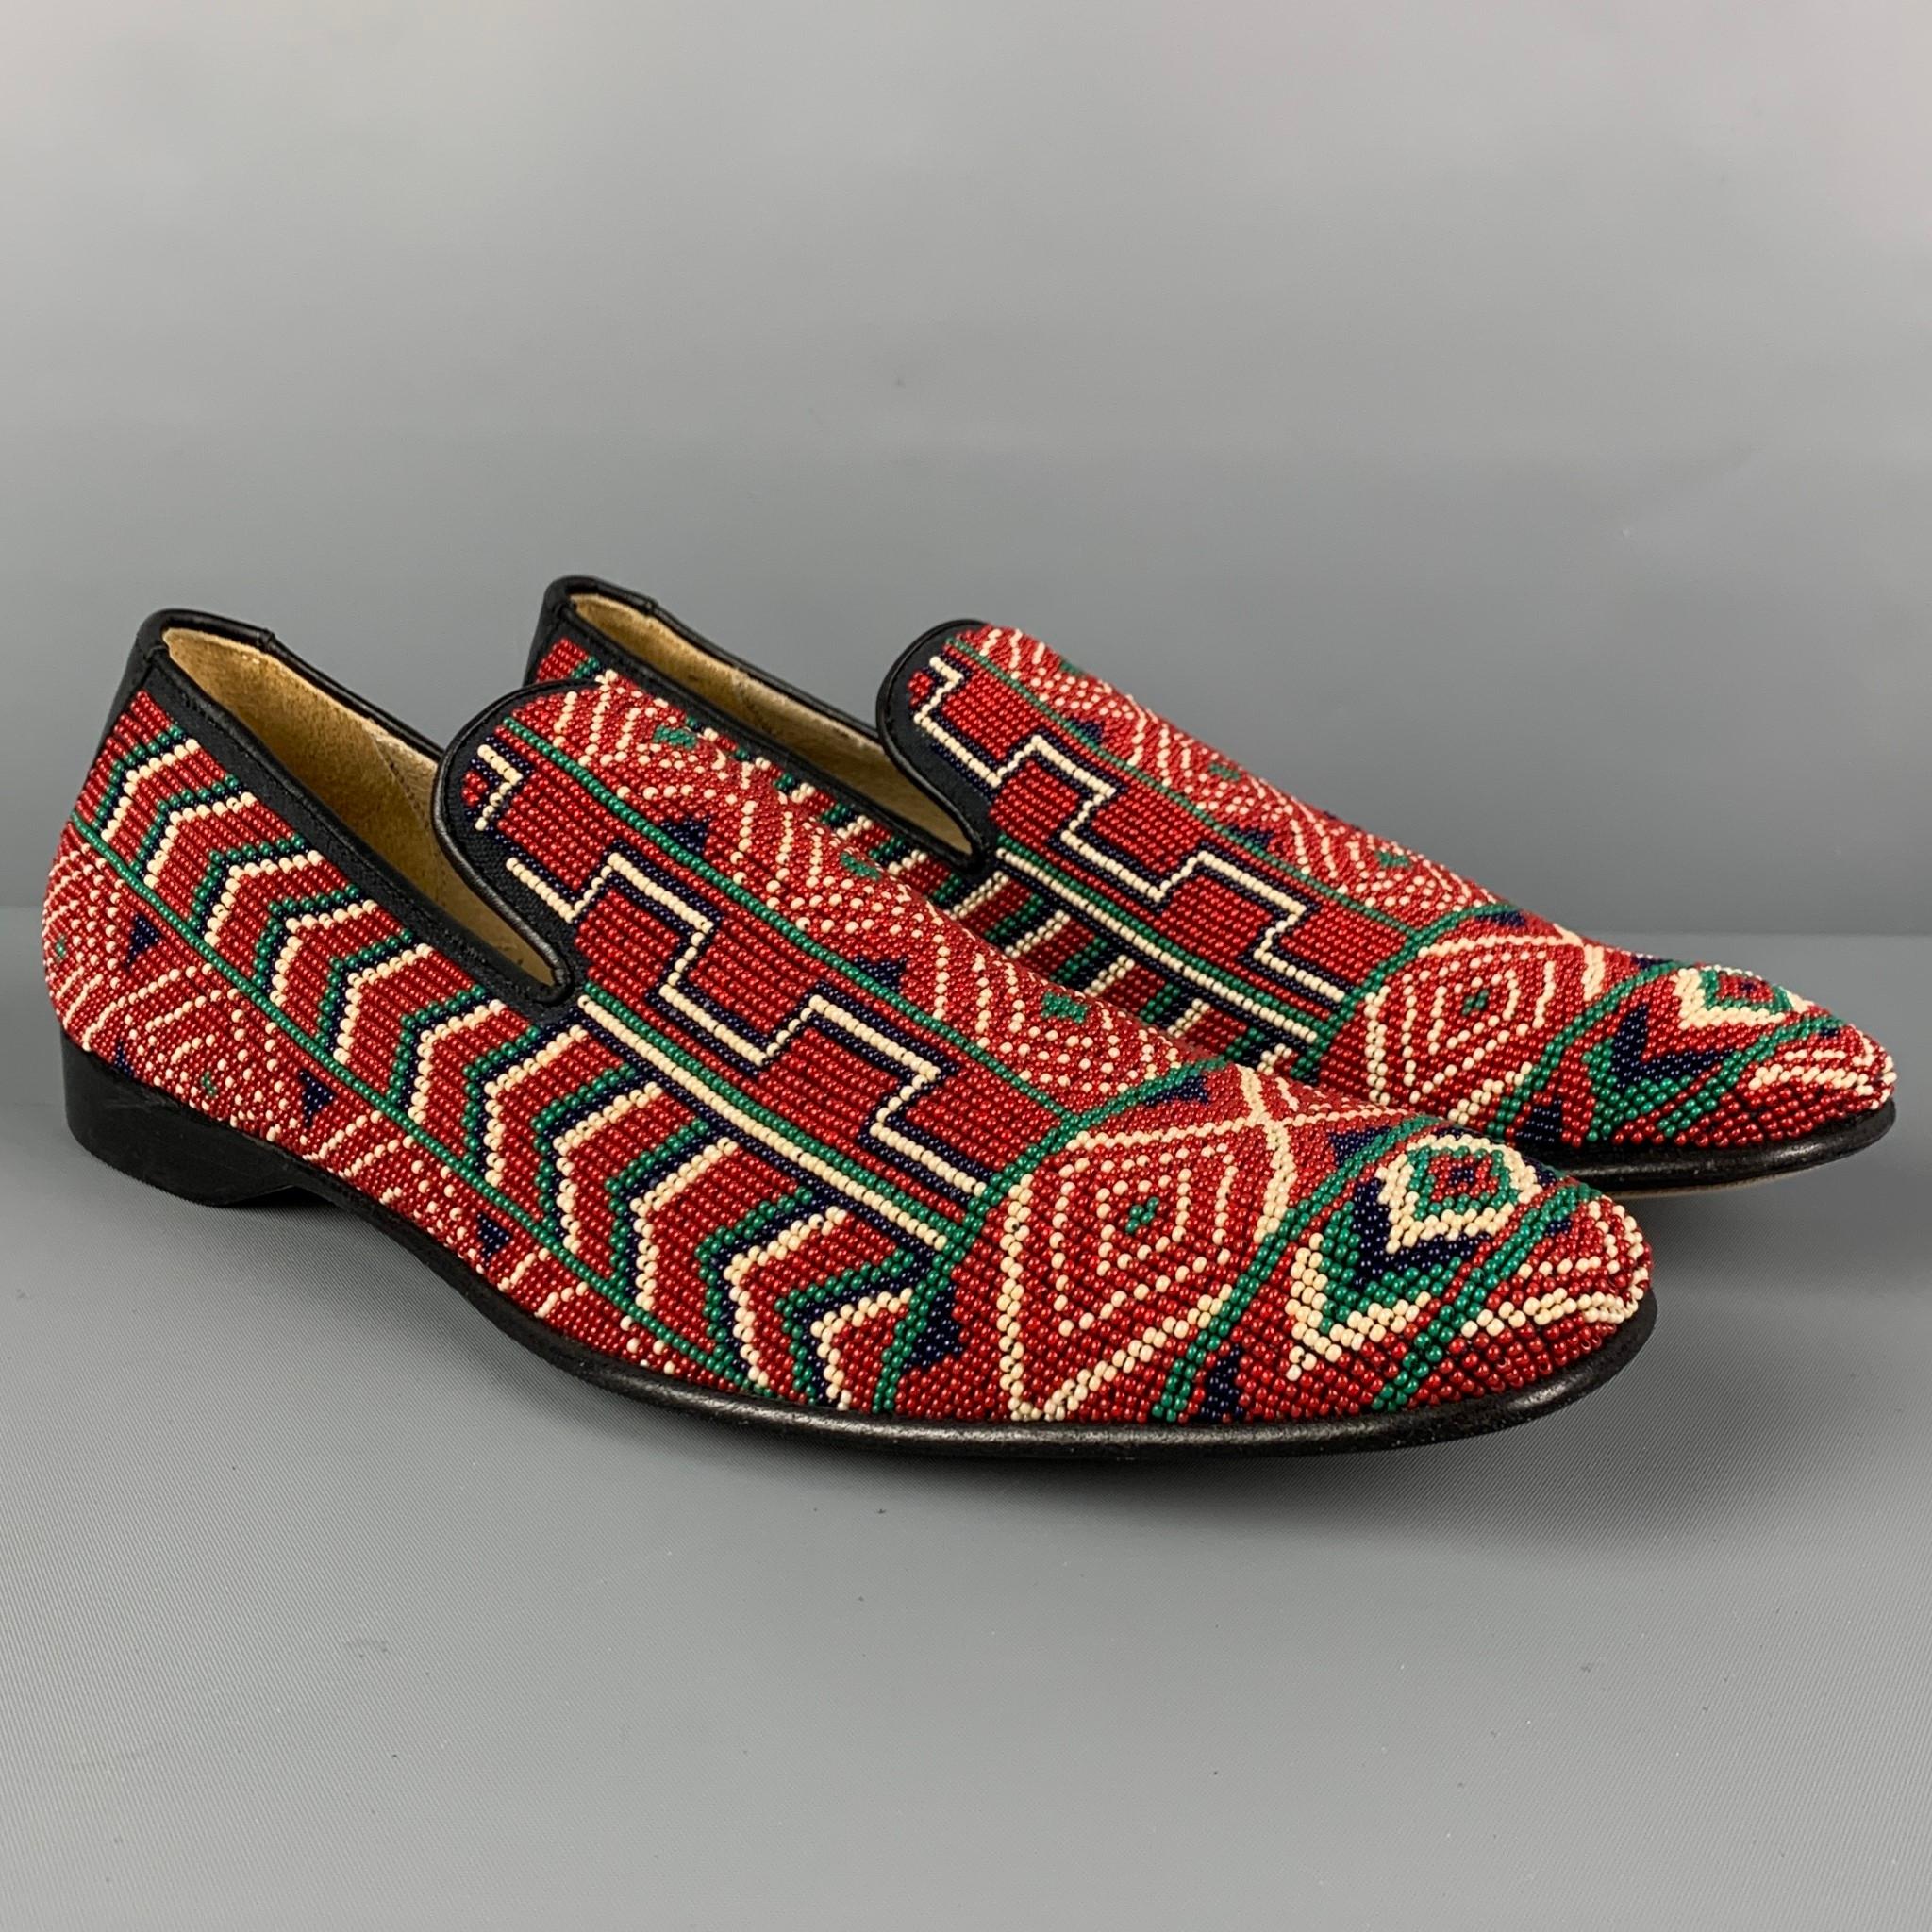 DONALD J PLINER loafers comes in a multi-color beaded leather featuring a slip on style and a square toe. Made in Italy. 

Very Good Pre-Owned Condition.
Marked: 9 M

Outsole: 11.75 in. x 4 in. 